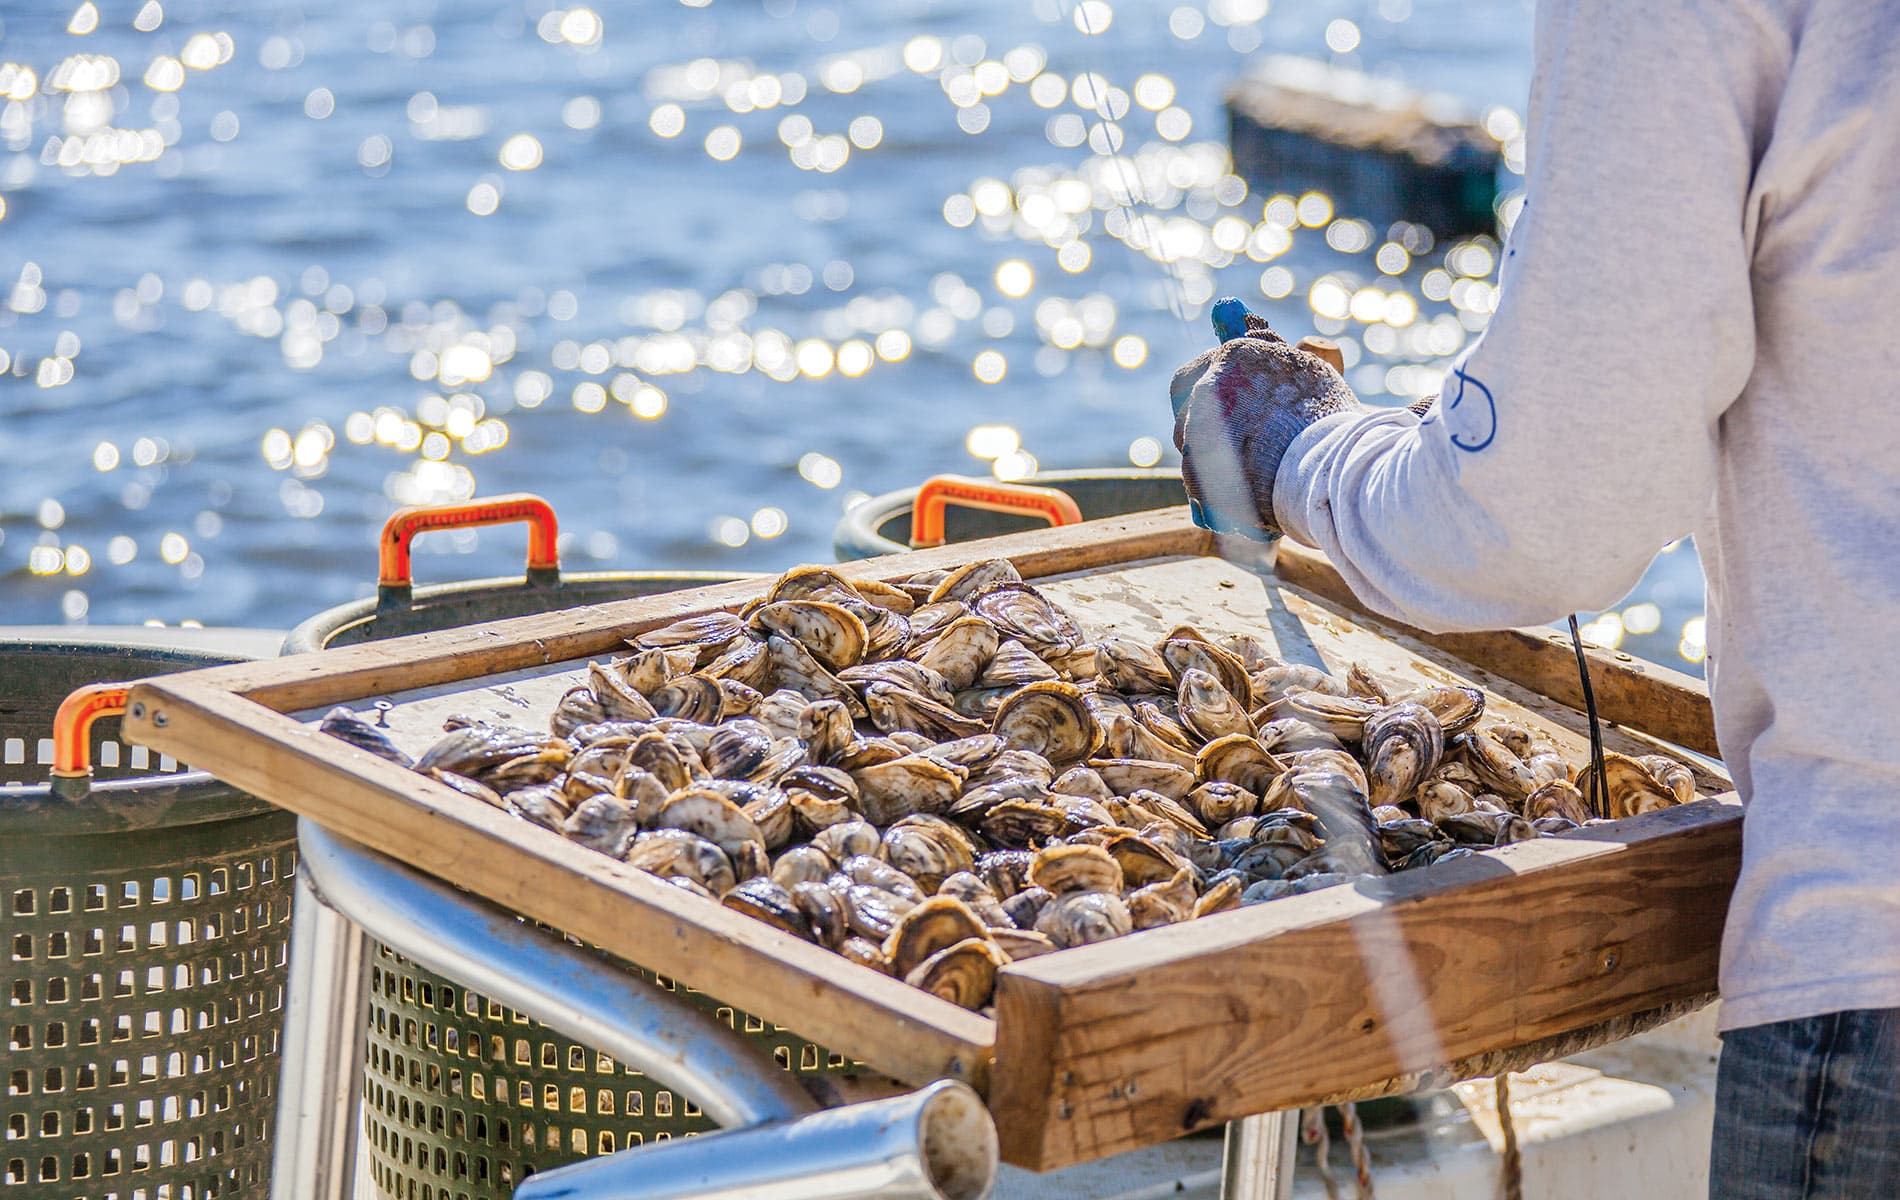 Florida fisherman bringing freshly caught oysters on the boat